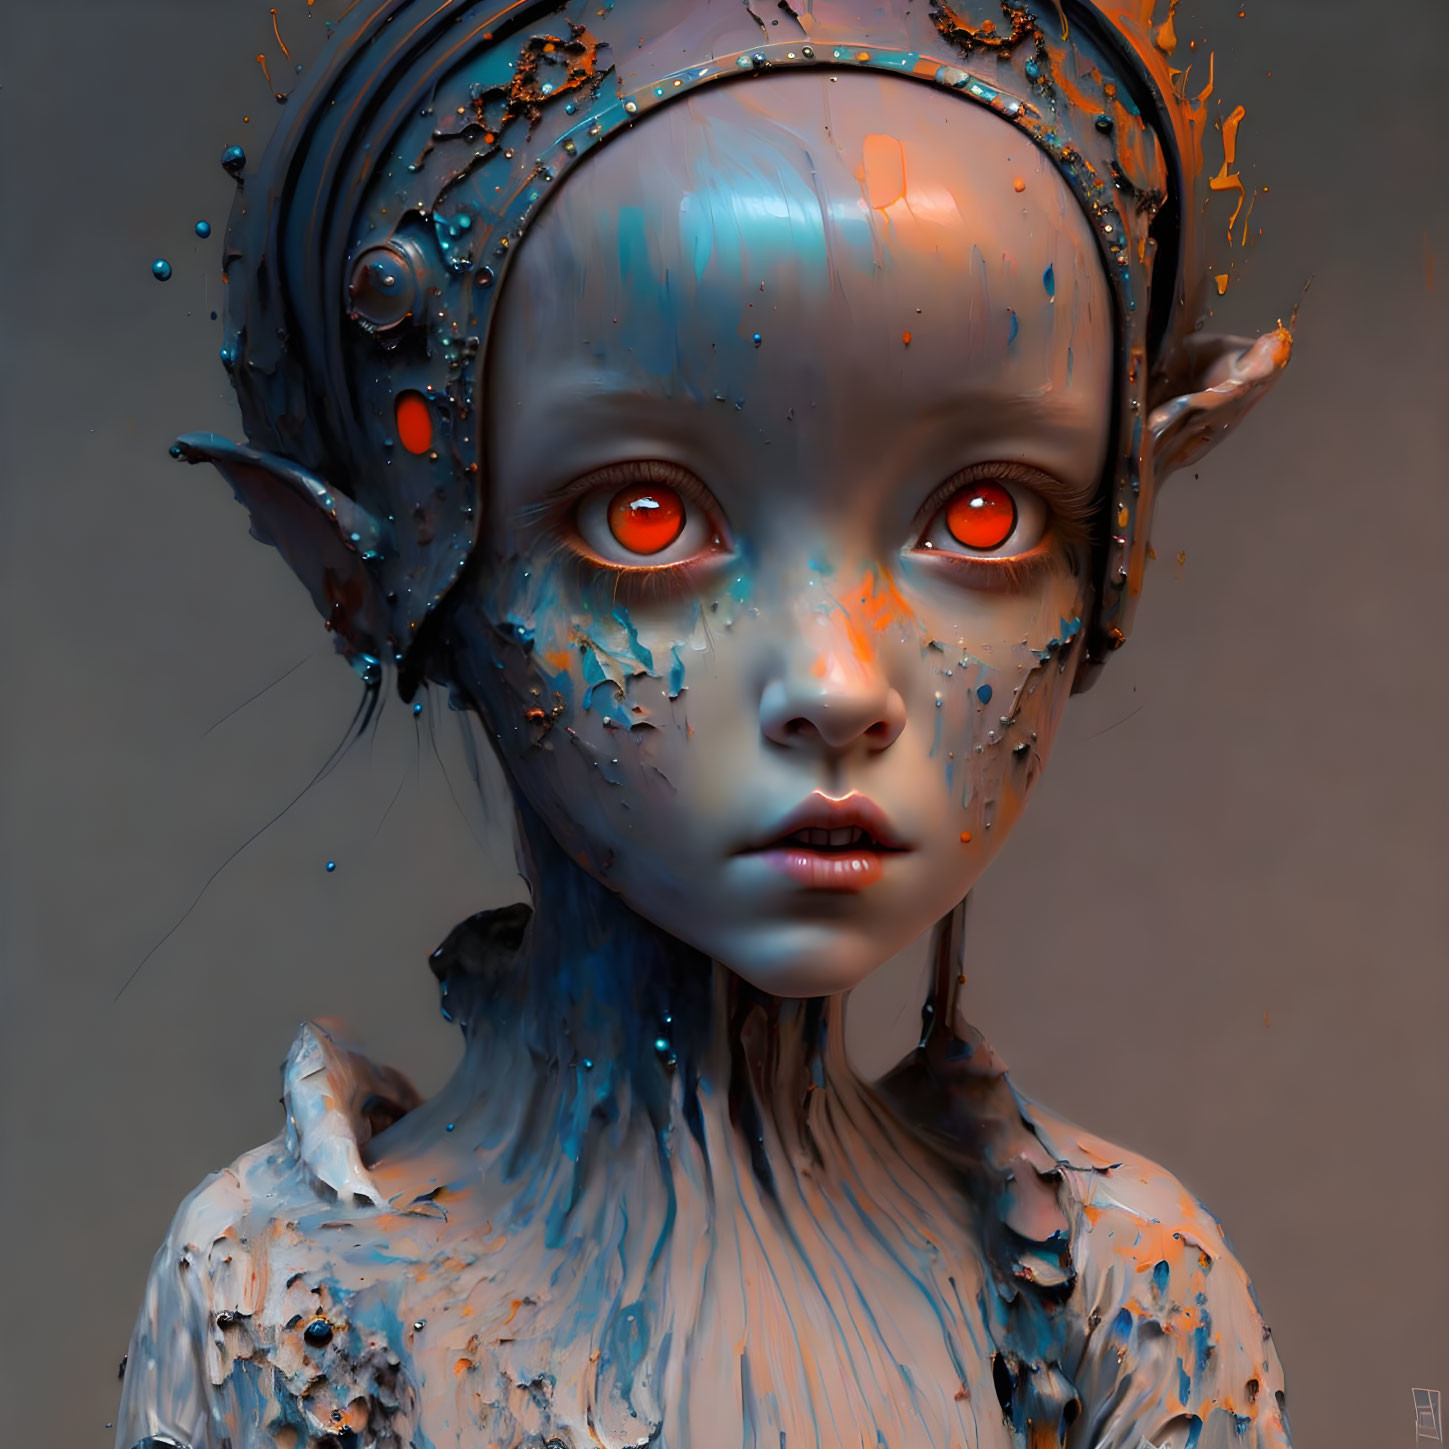 Blue-skinned fantasy creature with red glowing eyes and mechanical head elements.